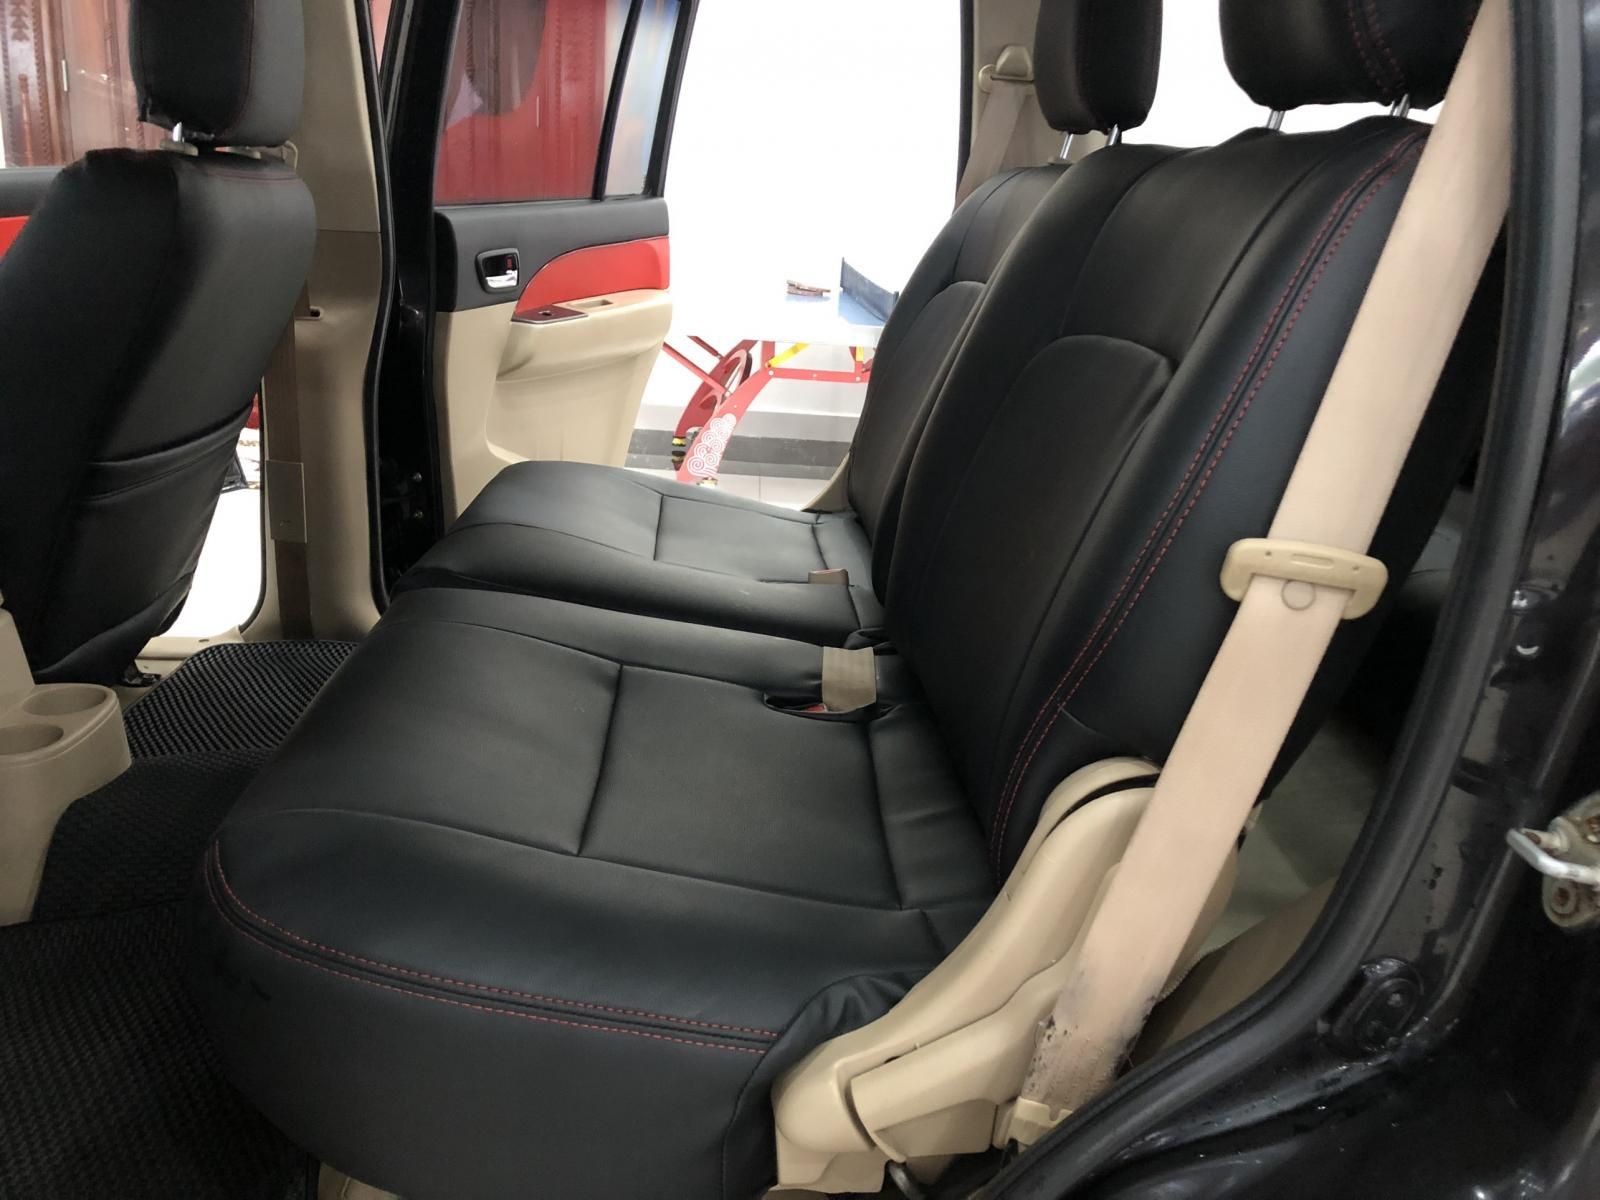 Ford Everest 2009 - Bán xe Ford Everest sản xuất năm 2009